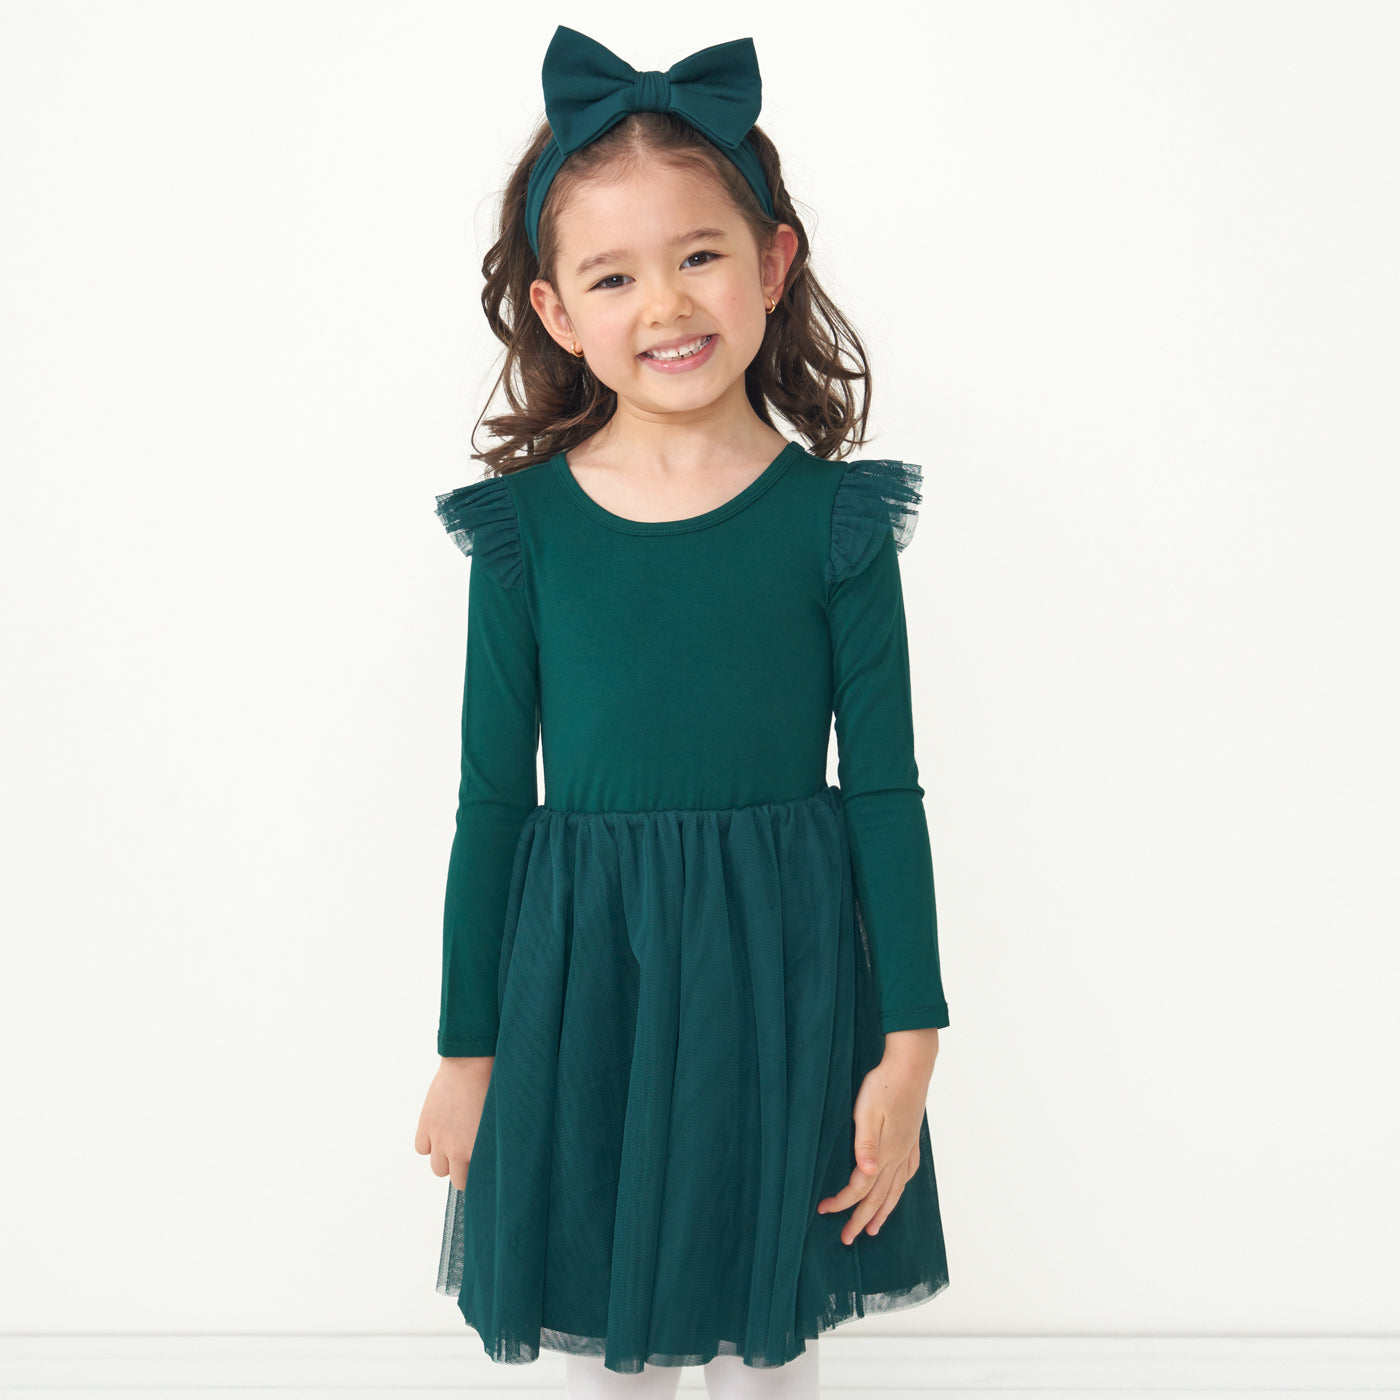 Child wearing an Emerald flutter tutu dress paired with an Emerald luxe bow headband